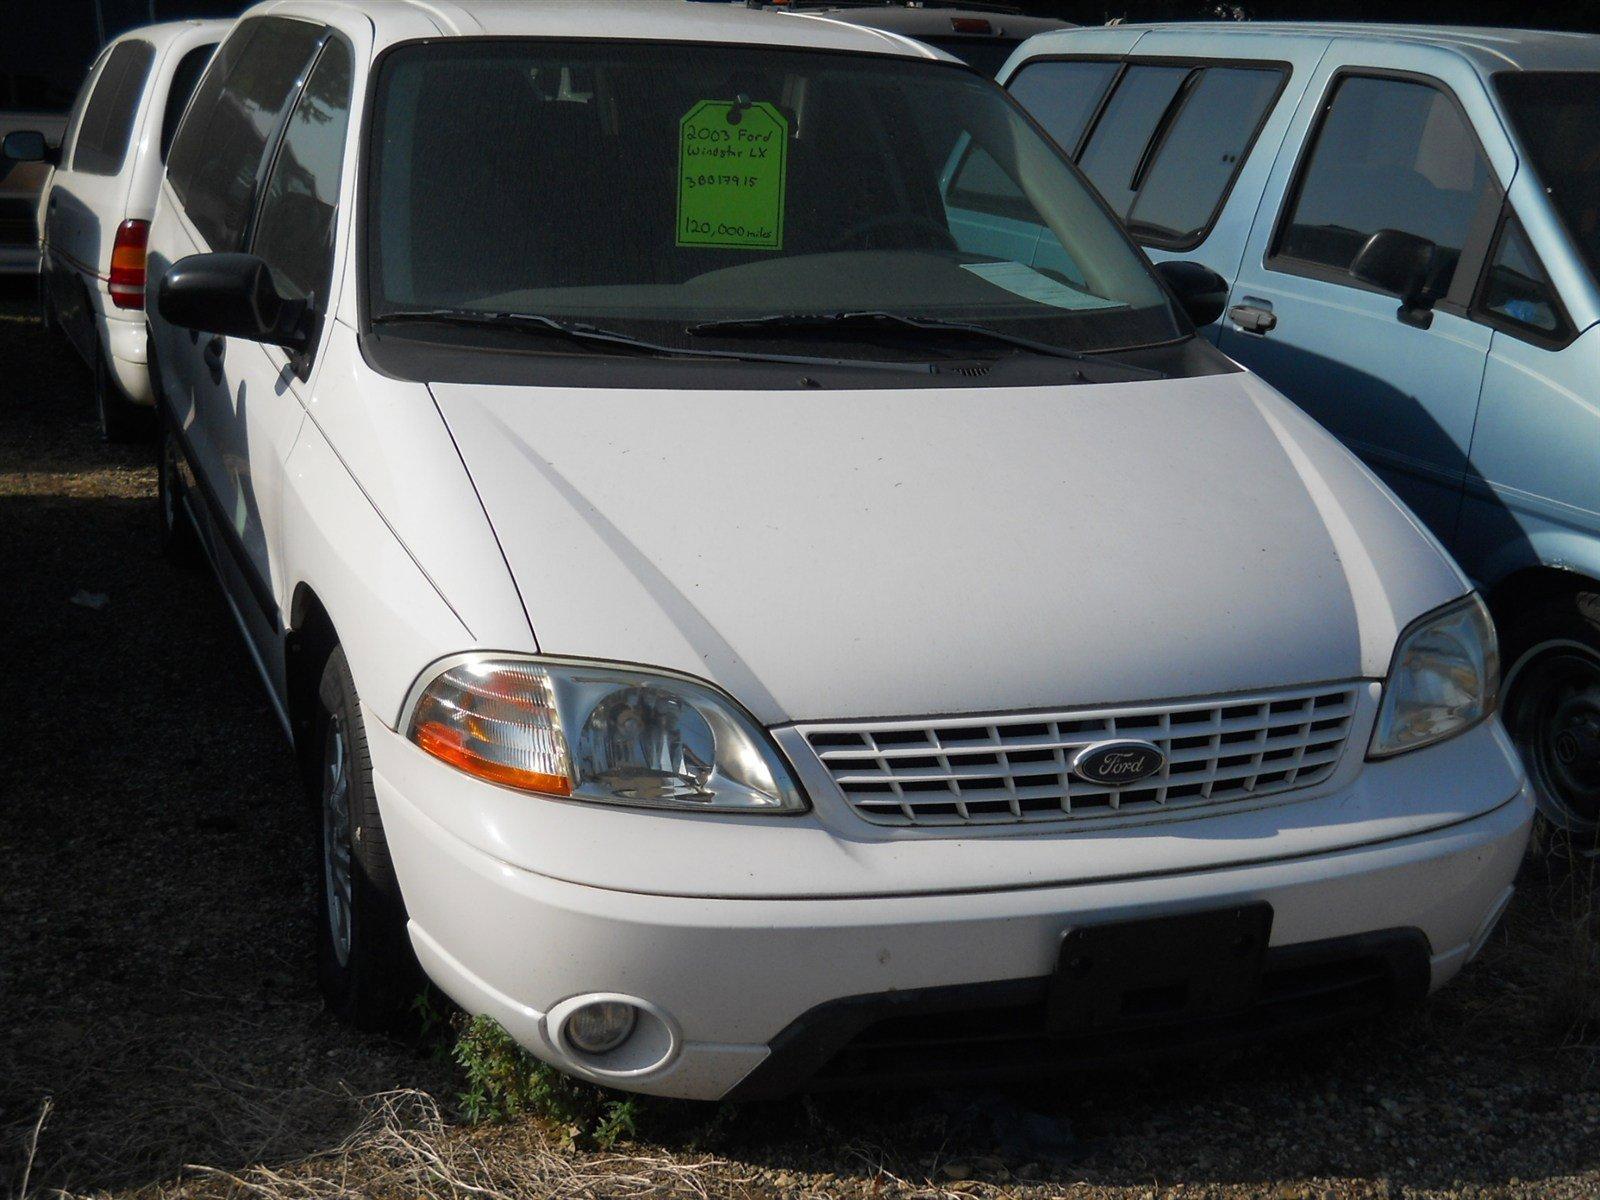 Used 2003 Ford Windstar LX Standard with VIN 2FMZA51453BB17915 for sale in Delavan, IL